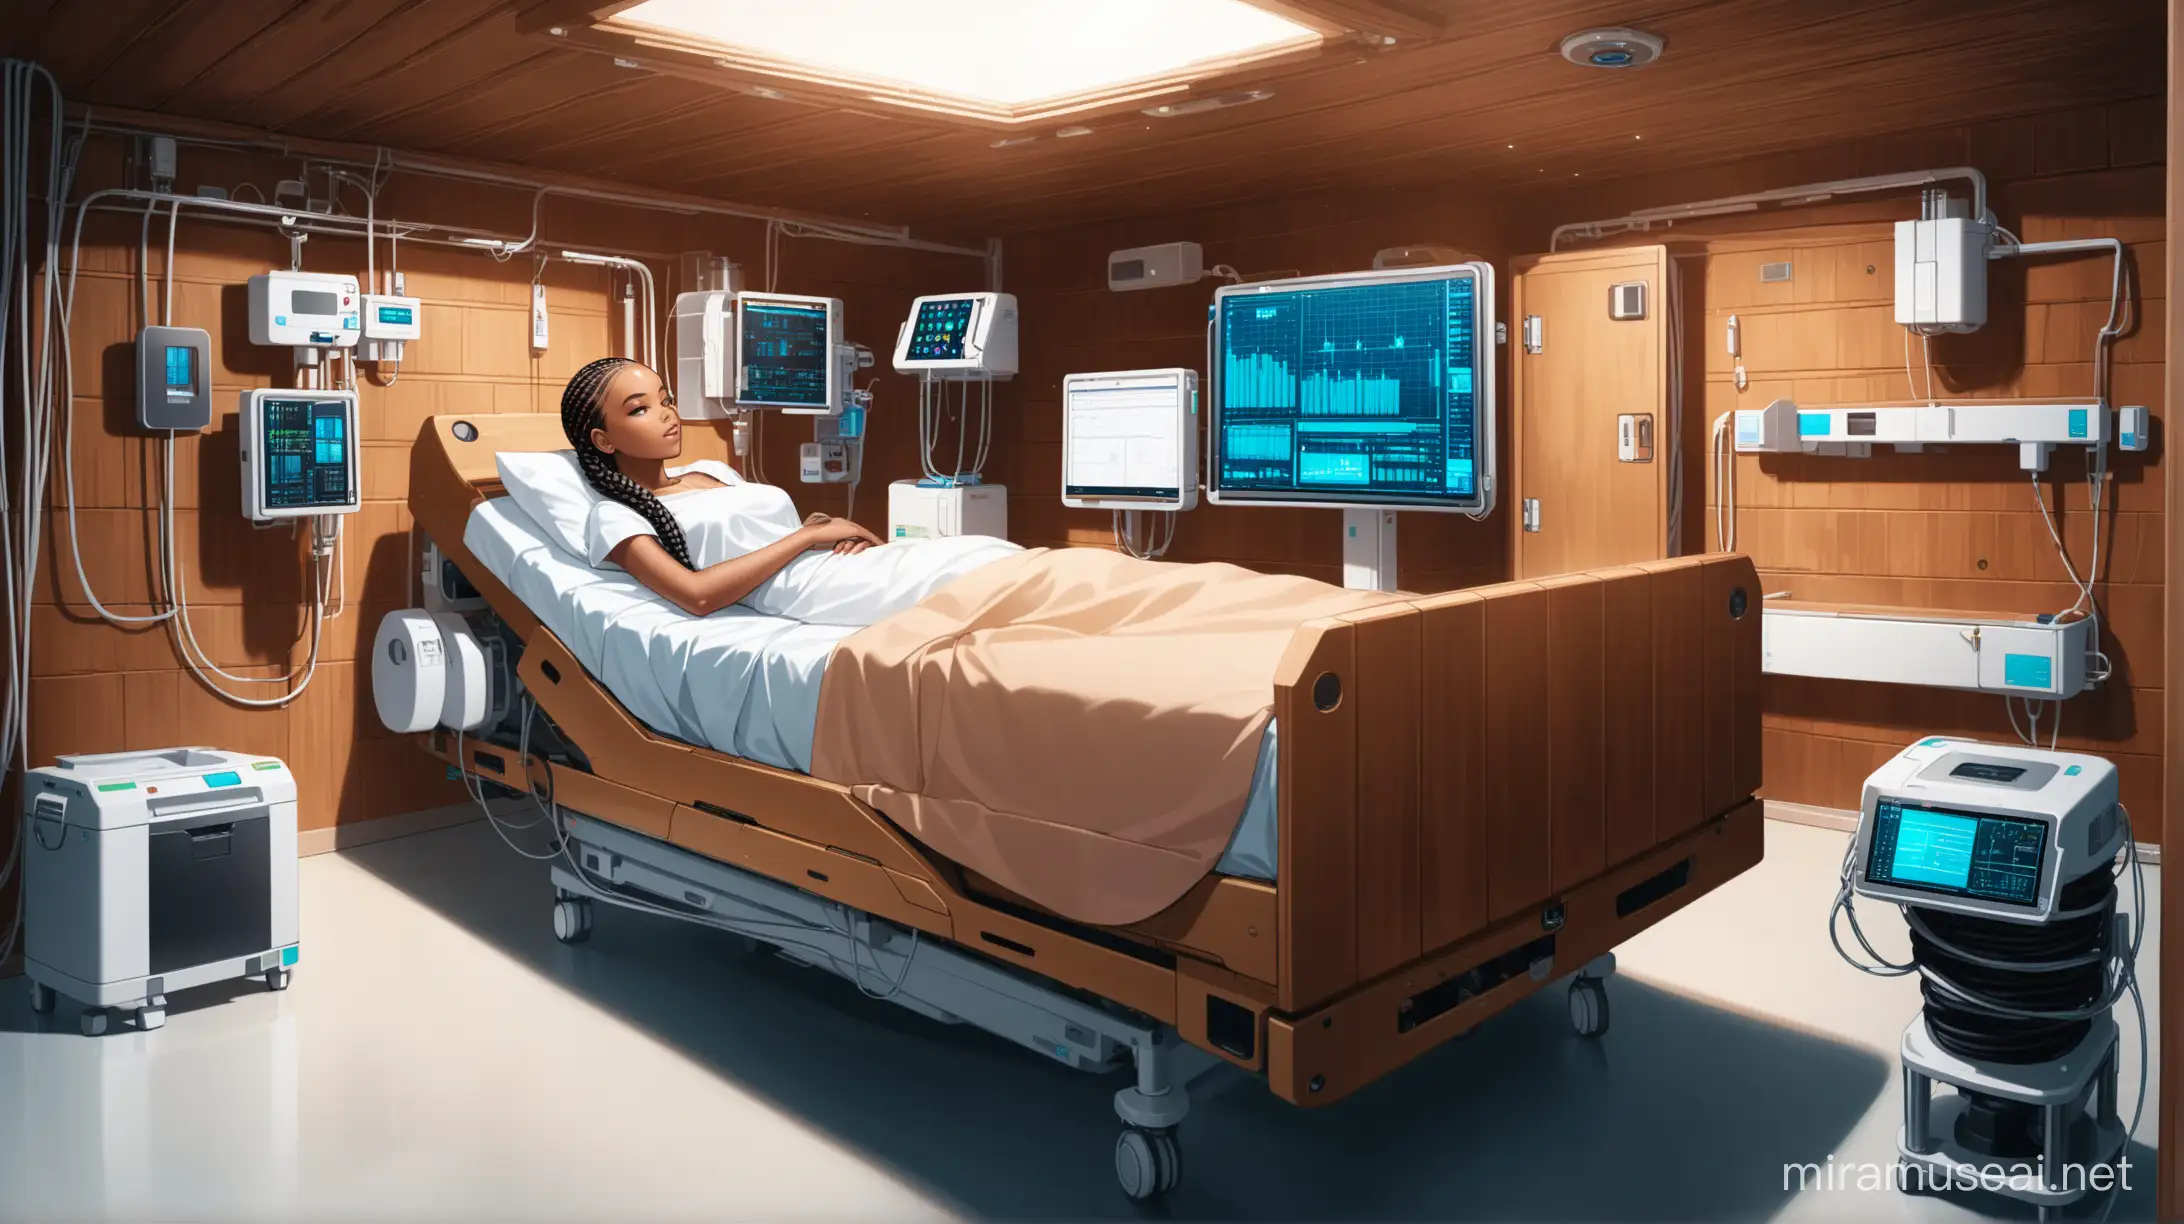 African Descent Woman with Cornrows in HighTech Medical Setup within a Wooden Cabin